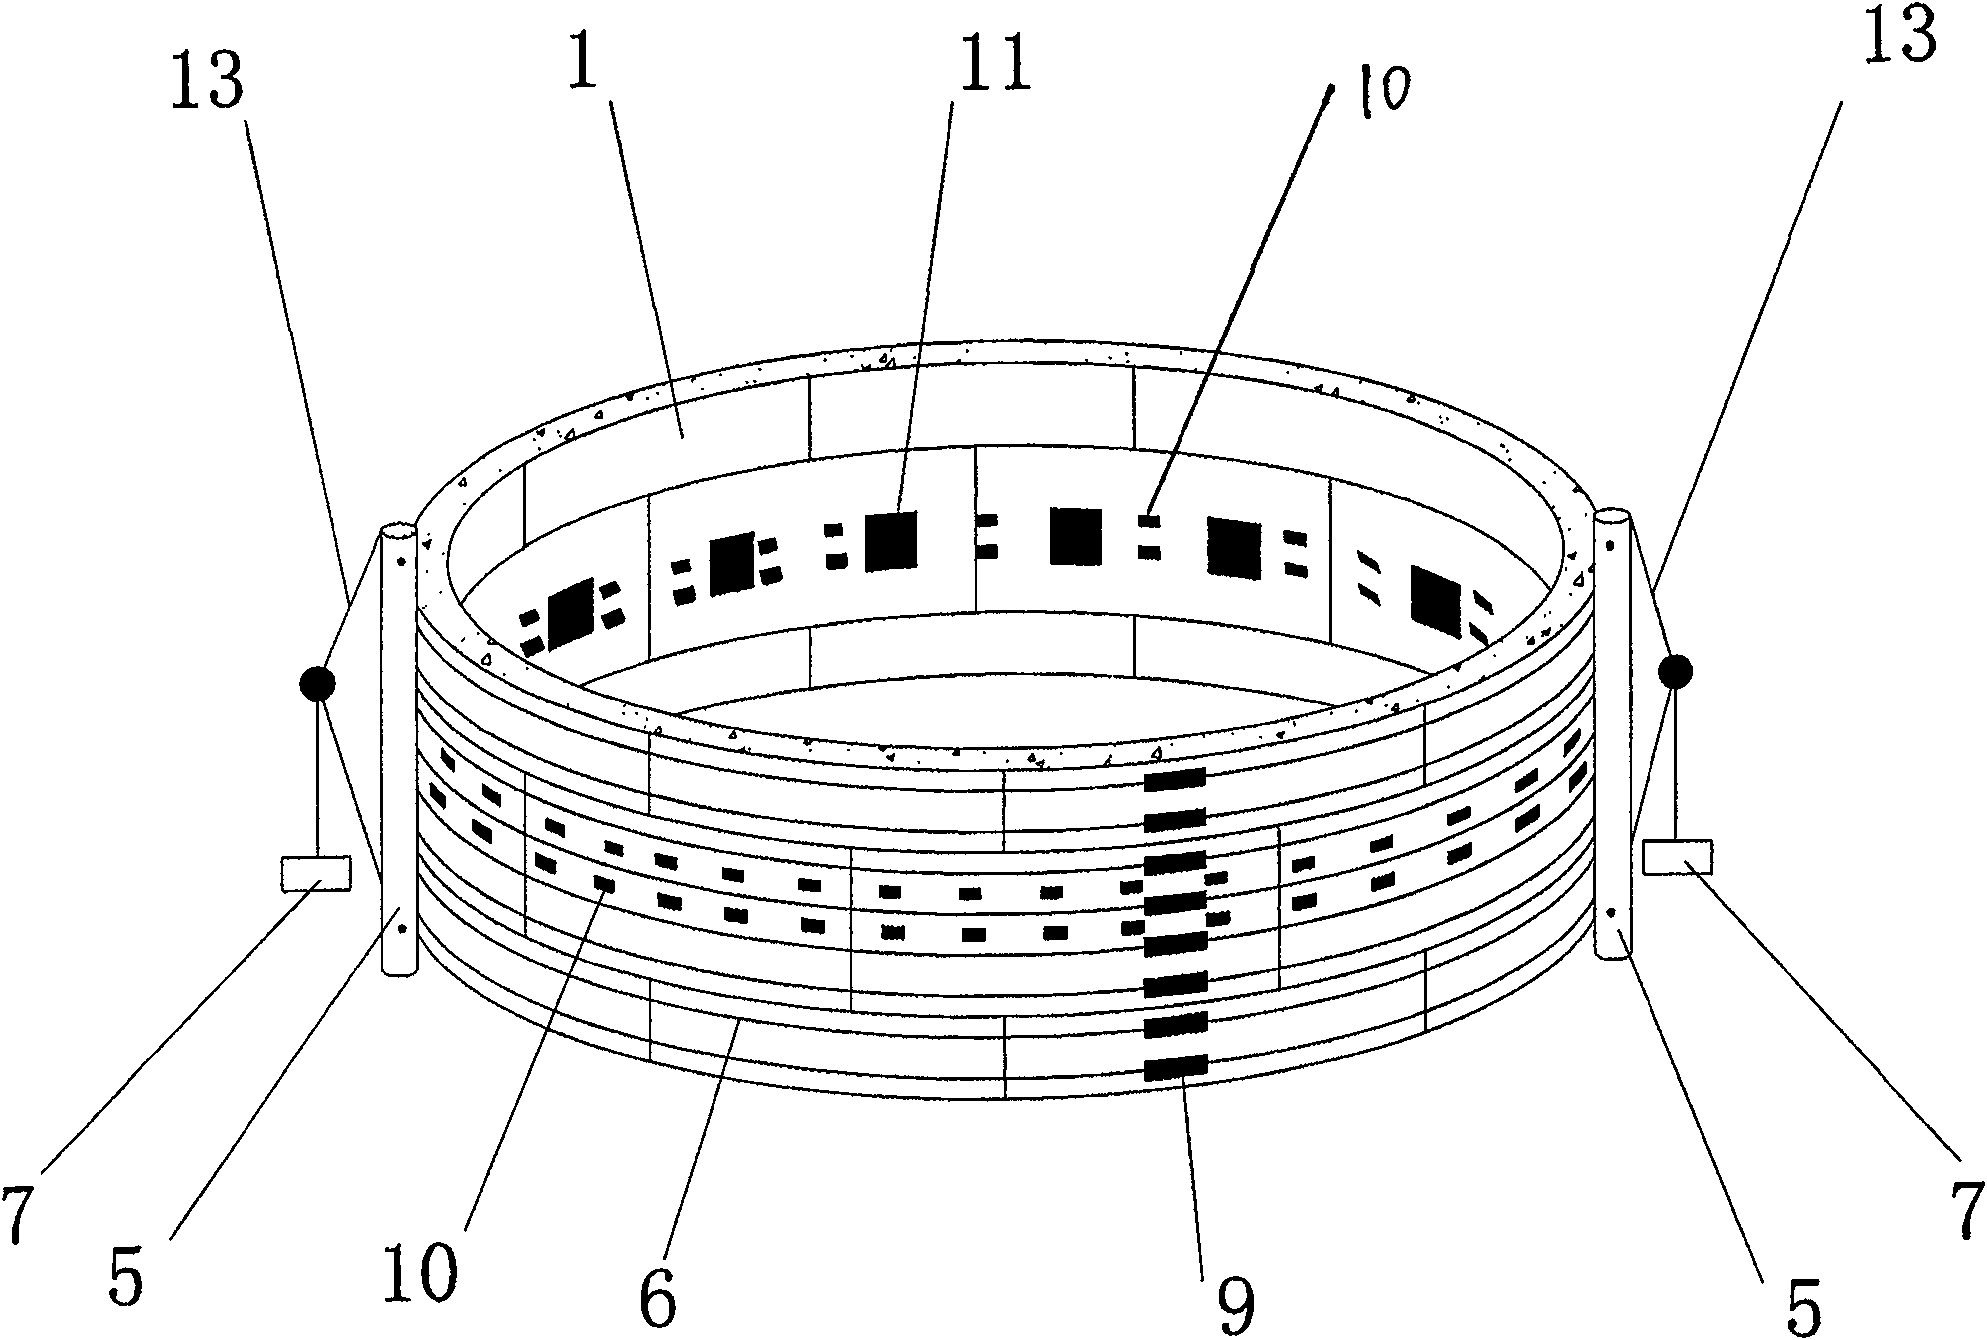 Hydraulic analogue method of shield tunneling structure model